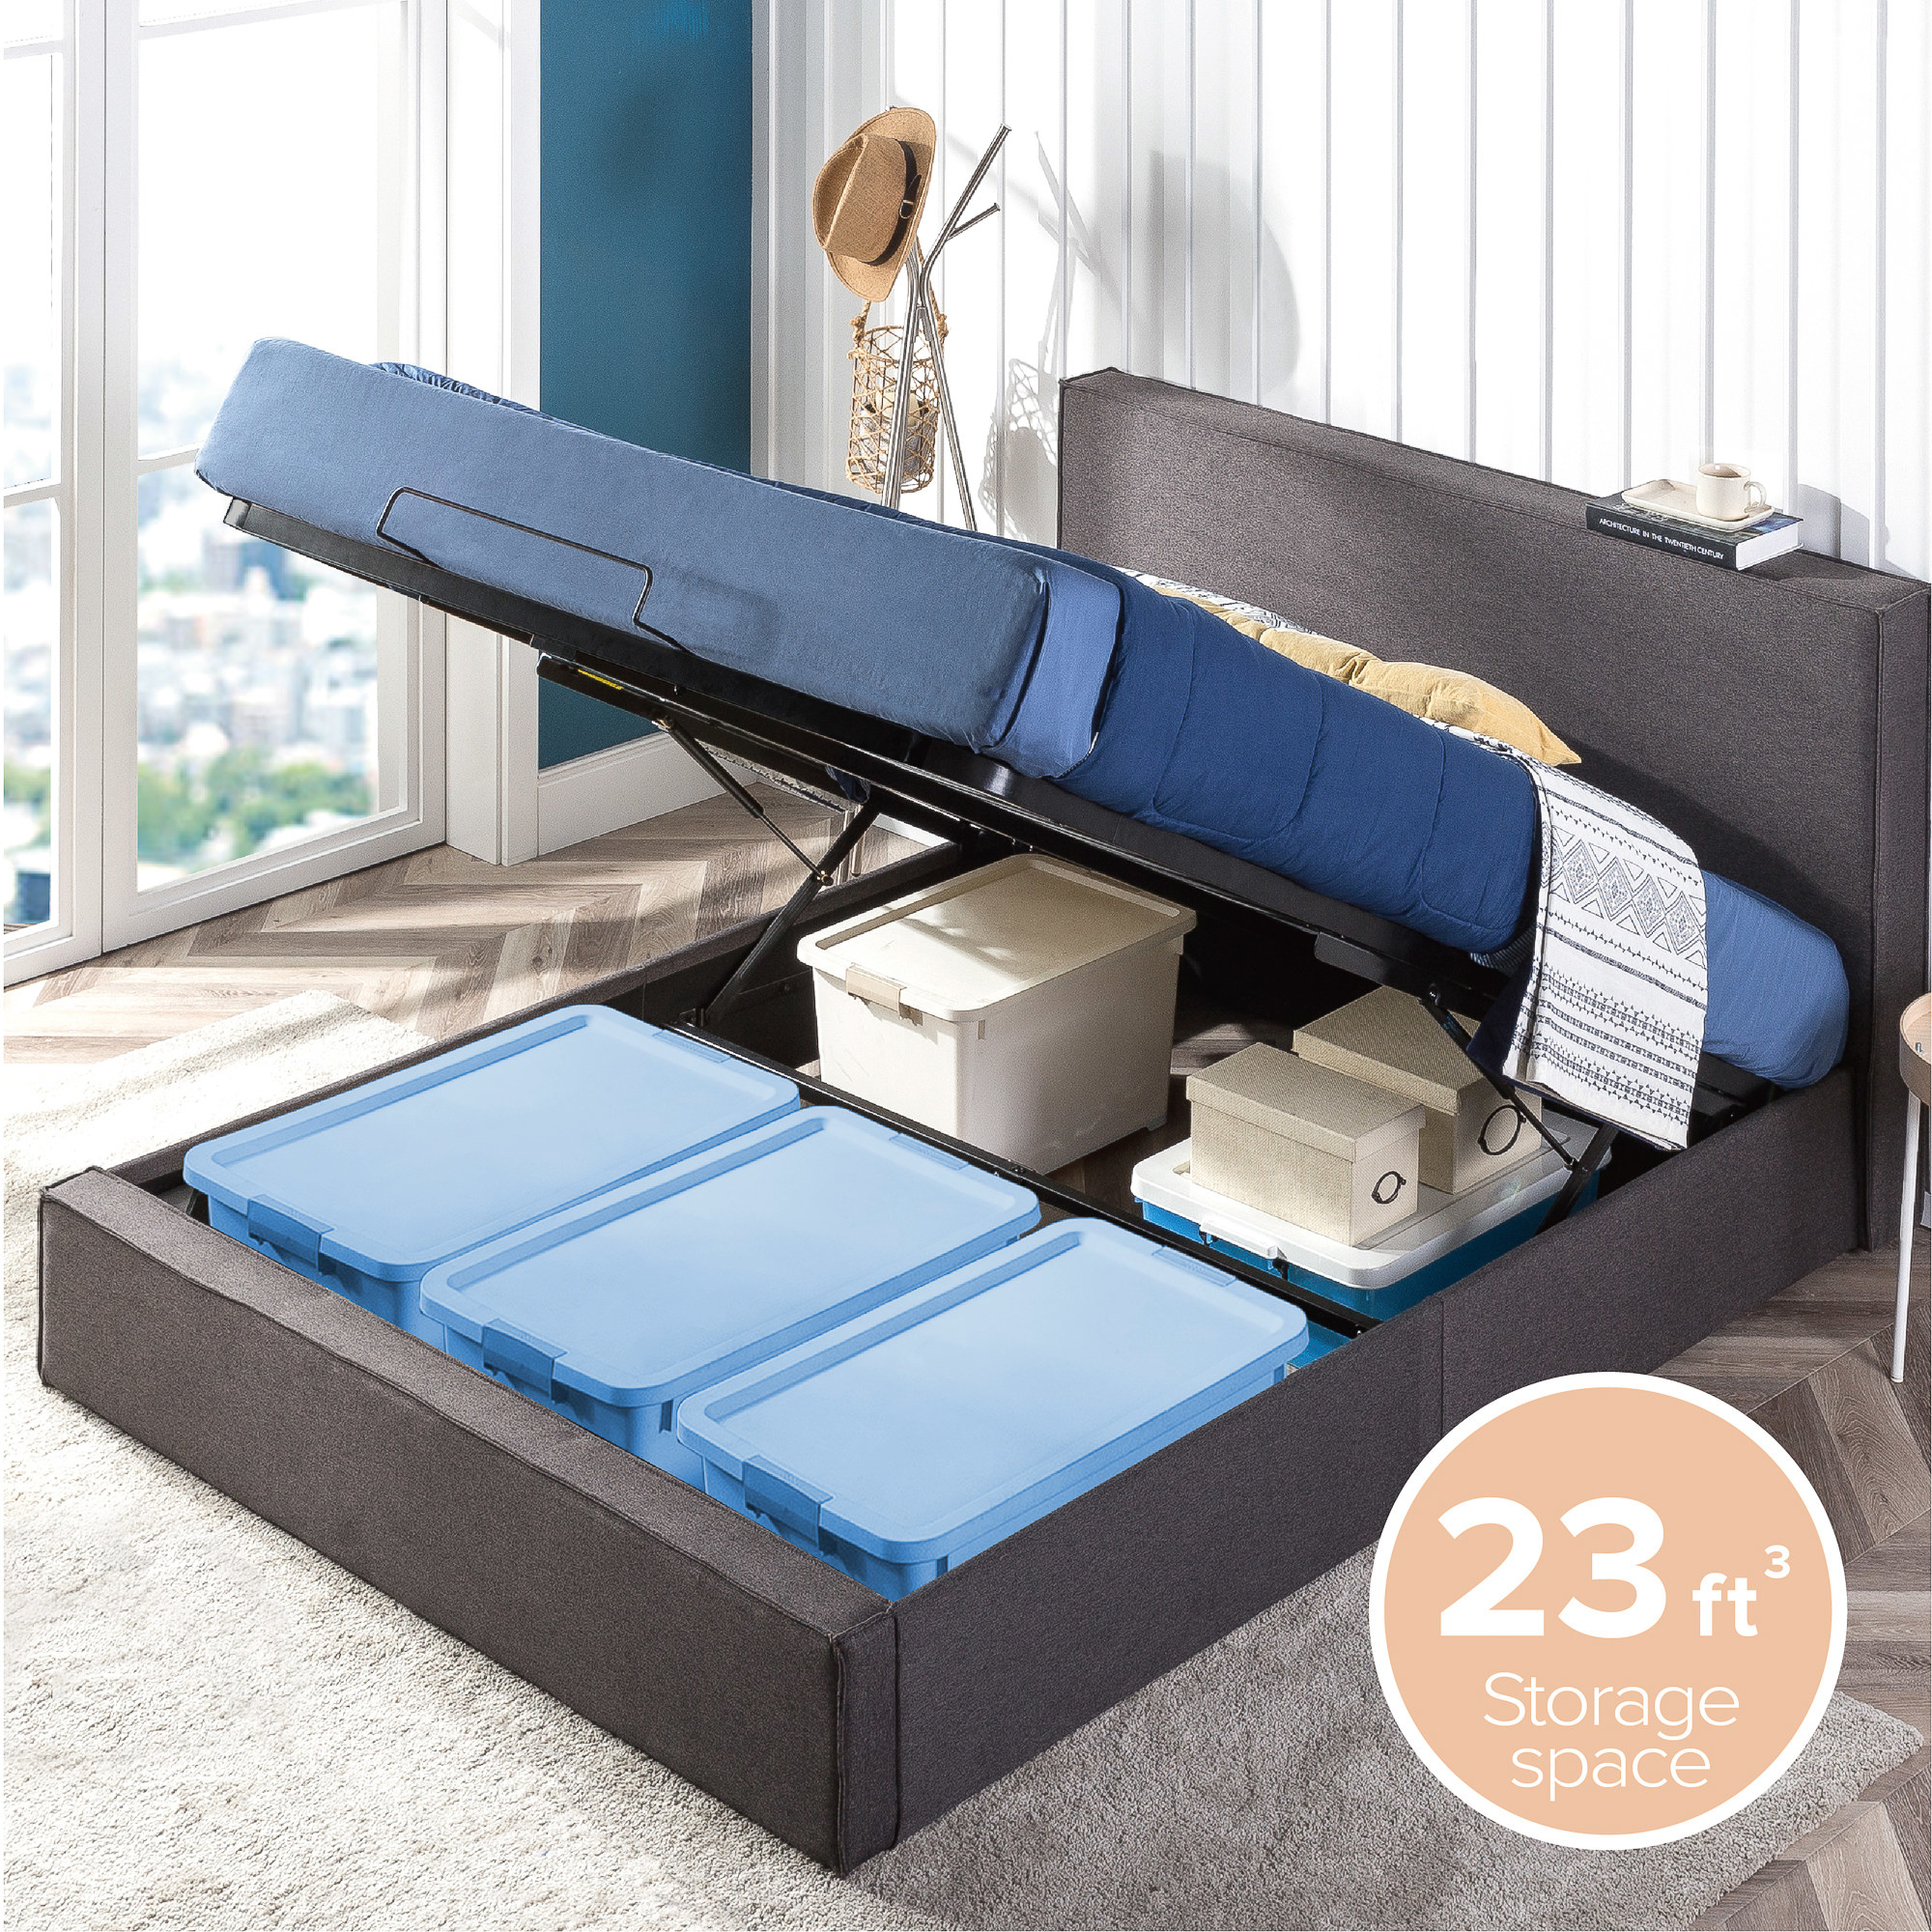 the bed with the mattress lifted to show the 23 cubed feet of storage space beneath